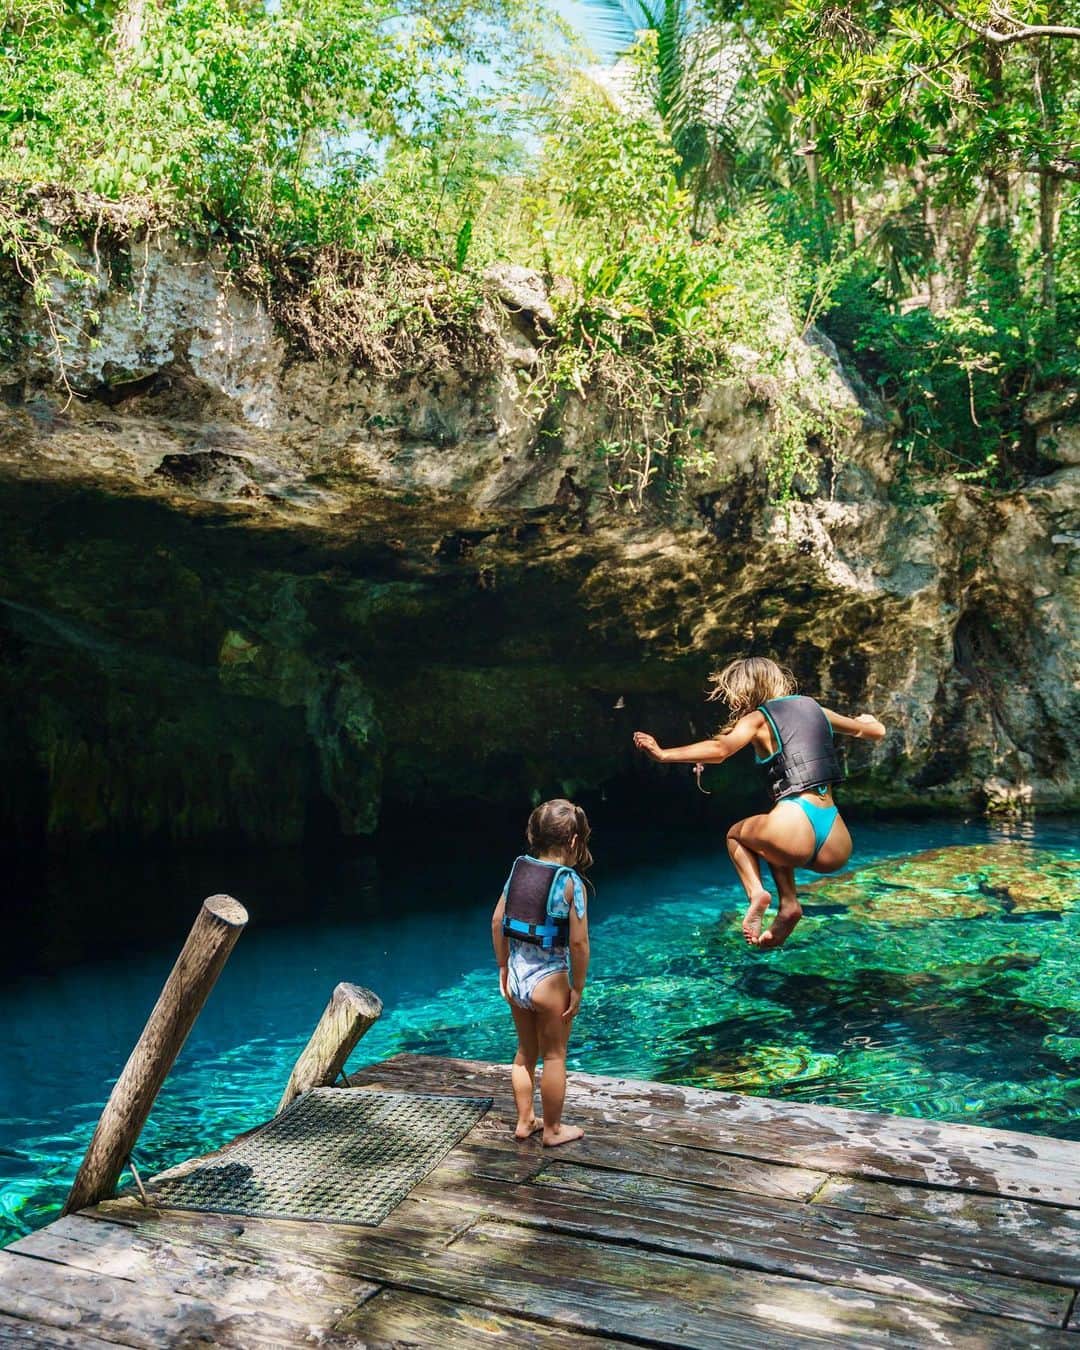 Elisabeth Riouxのインスタグラム：「When she was born,  I wanted to show her my world but it ended up being her showing me our world 🌎   Our mini adventure during an extremely relaxing trip 🐠  Cenote are so unique & unreal, alot of scientists say they were caused by the asteroid that destroyed the dinosaurs since they form a perfect circle with the Gulf of Mexico hole, & they’re so deep that we can’t explore them to the bottom ✨ I wonder what secret they are hiding & feel very lucky to explore them with Wolfie Doupi, our world is so special 🥹」